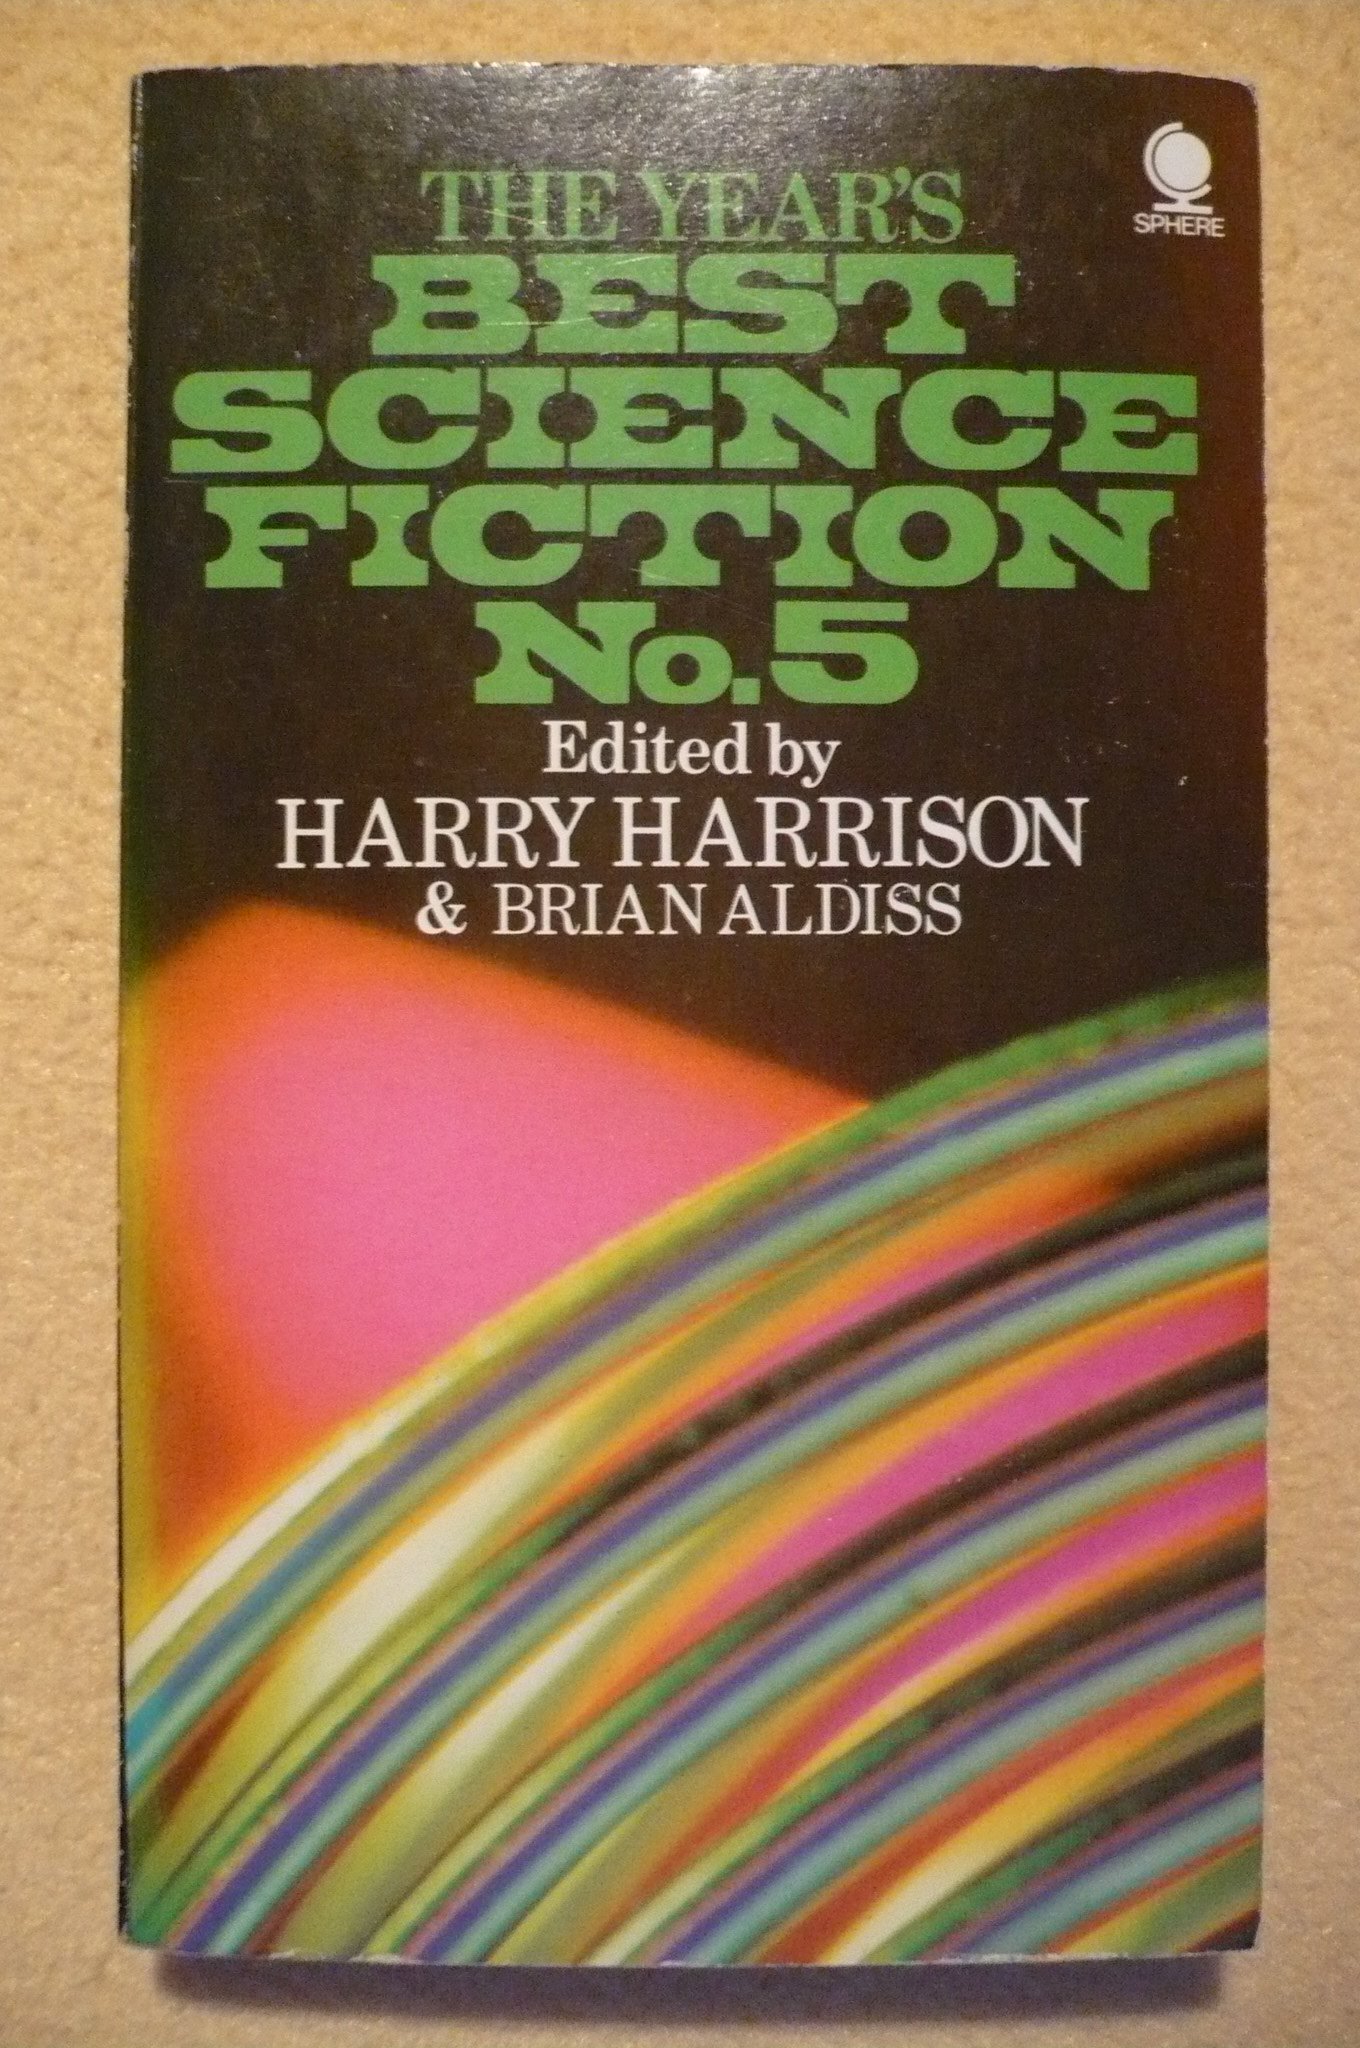 The Year's Best Science Fiction No 5 - Harry Harrison & Brian Aldiss (Editors)